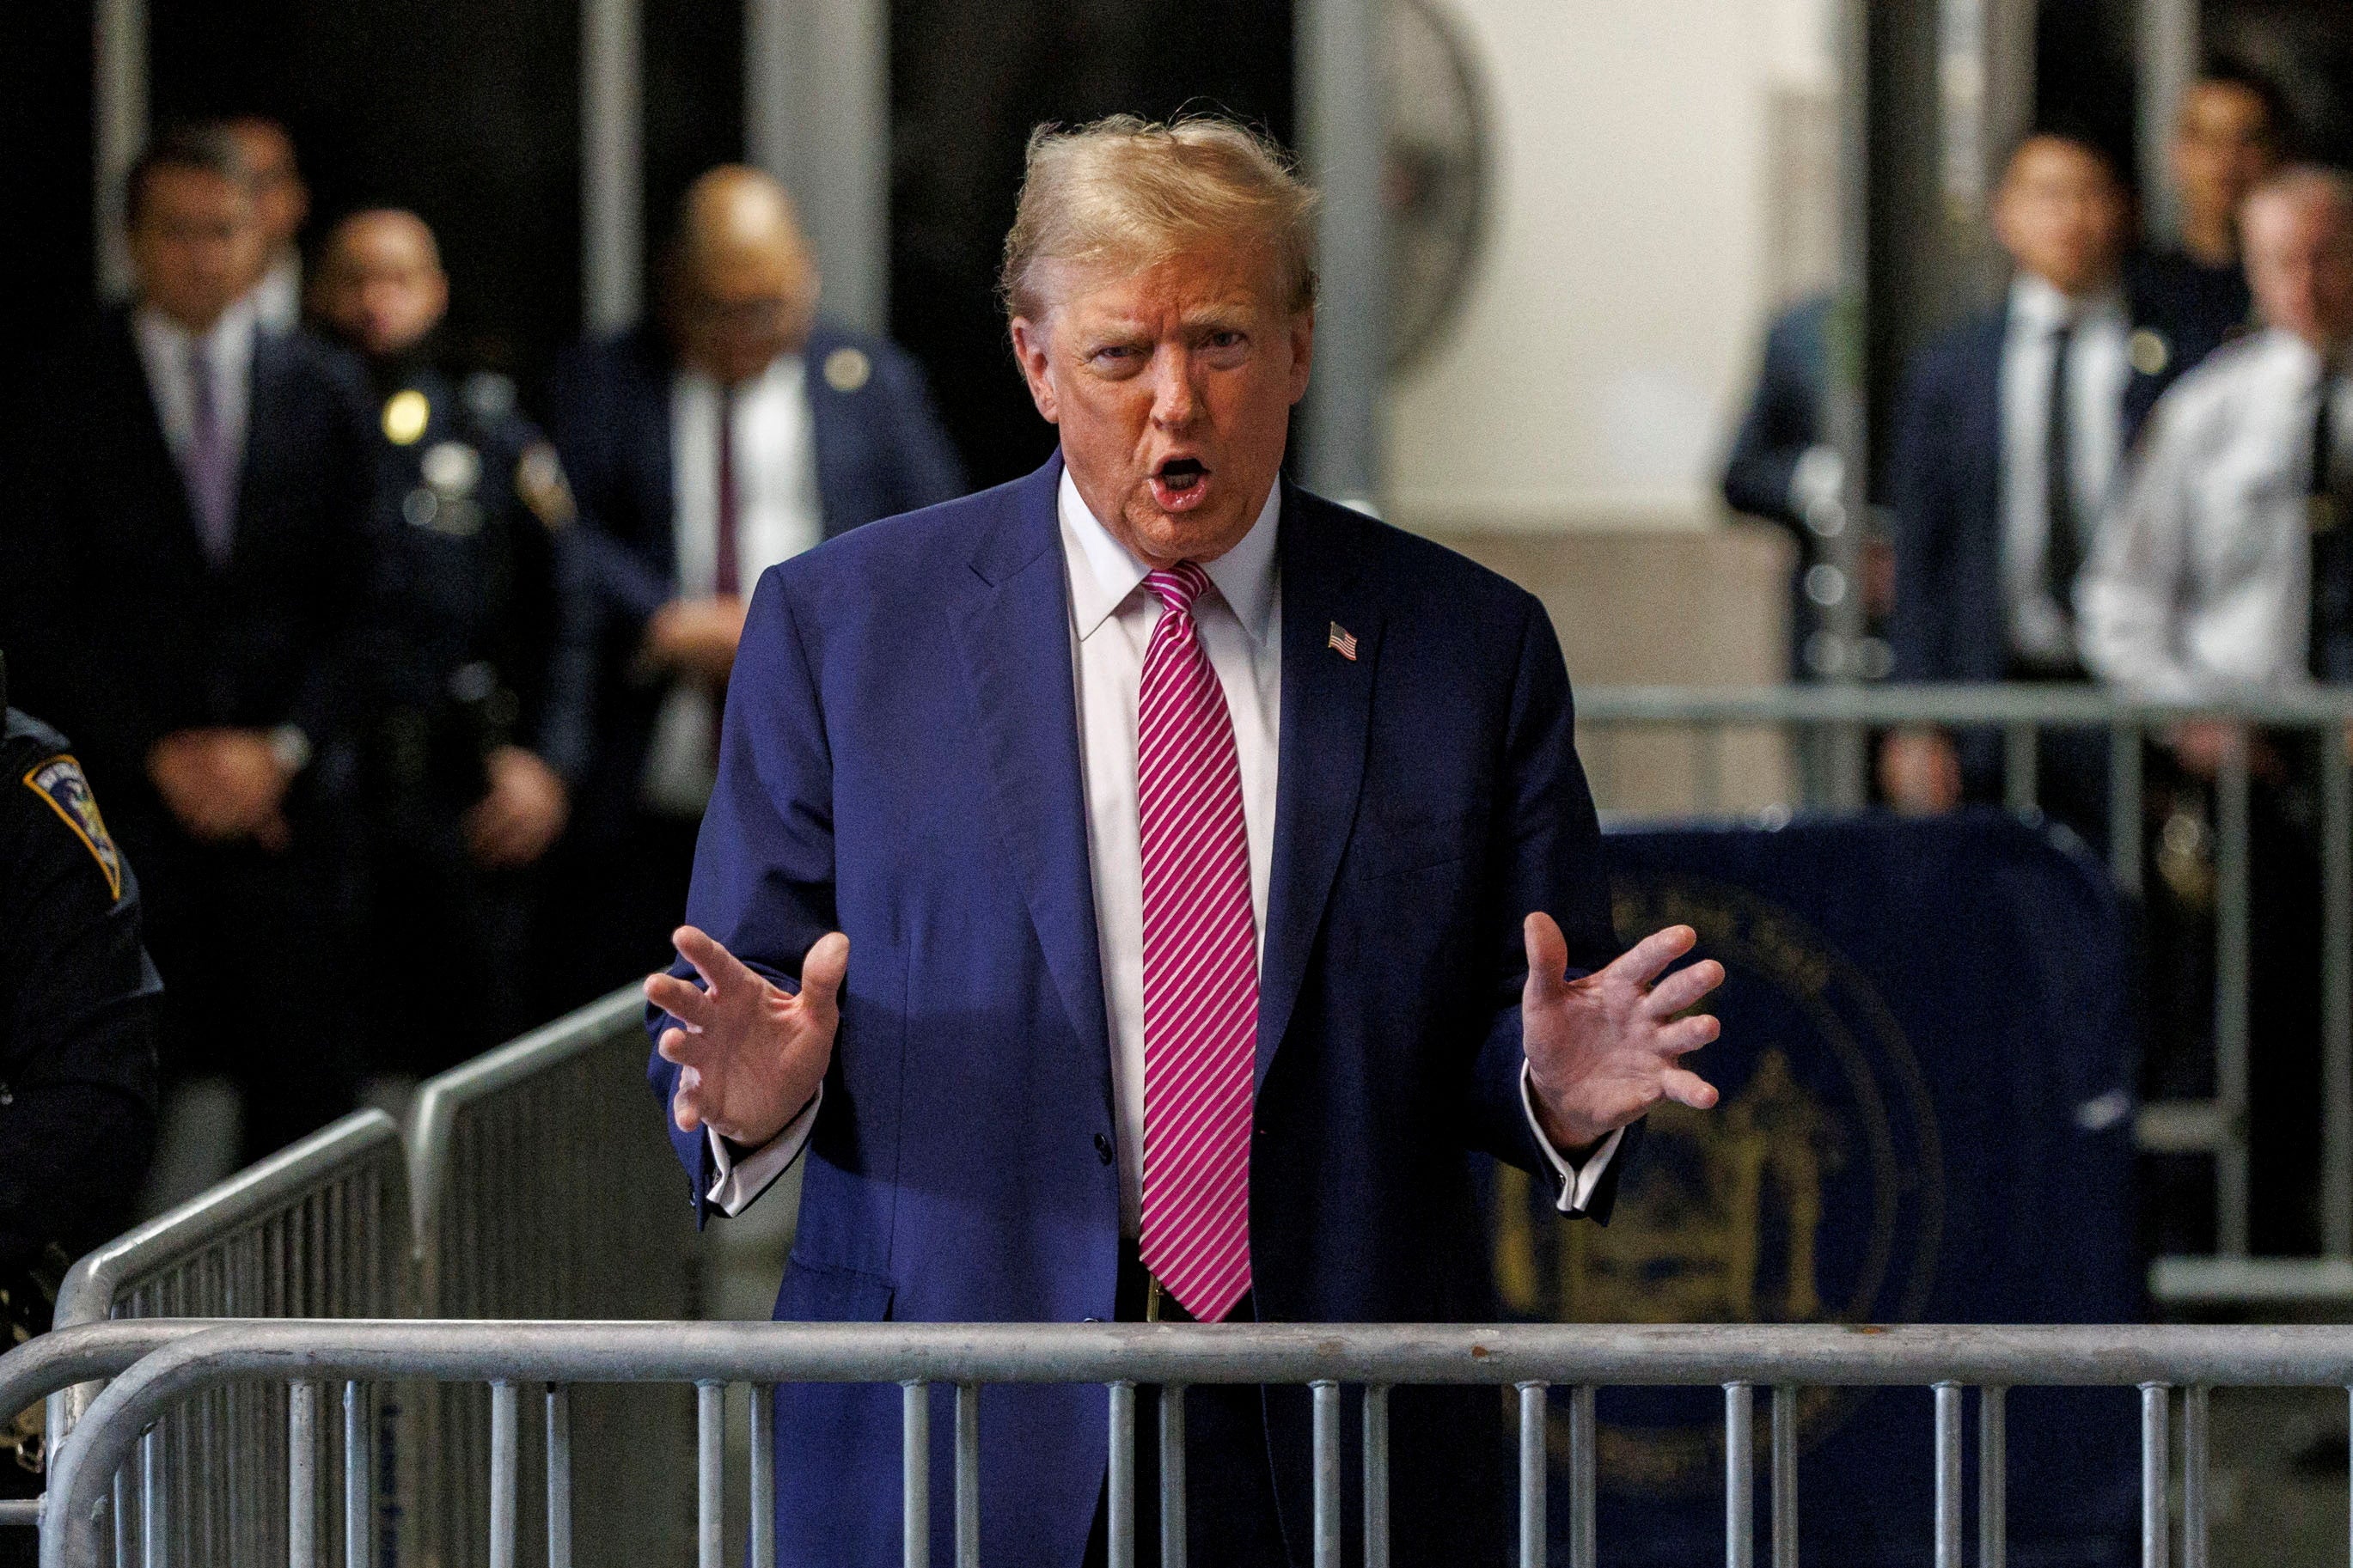 Donald Trump speaks to the press before court on 19 April